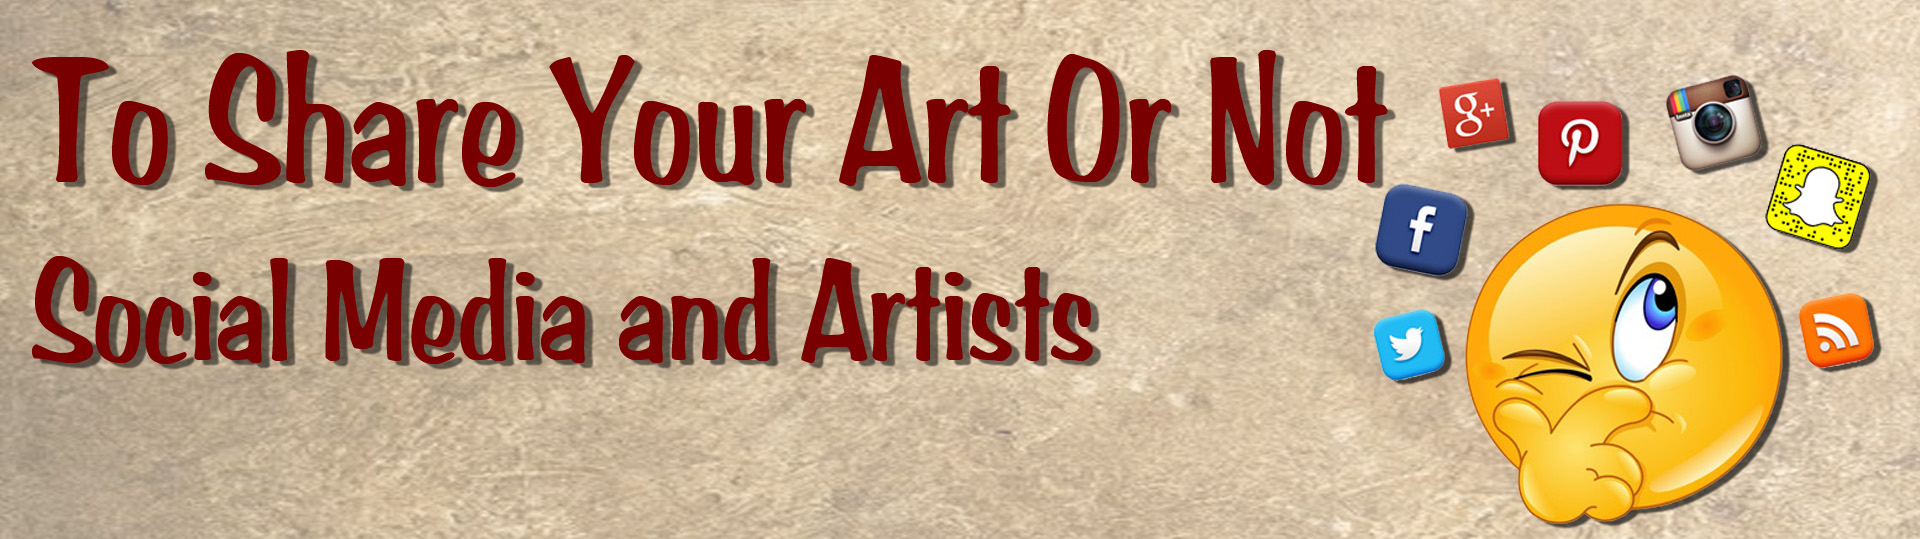 To Share Your Art Or Not